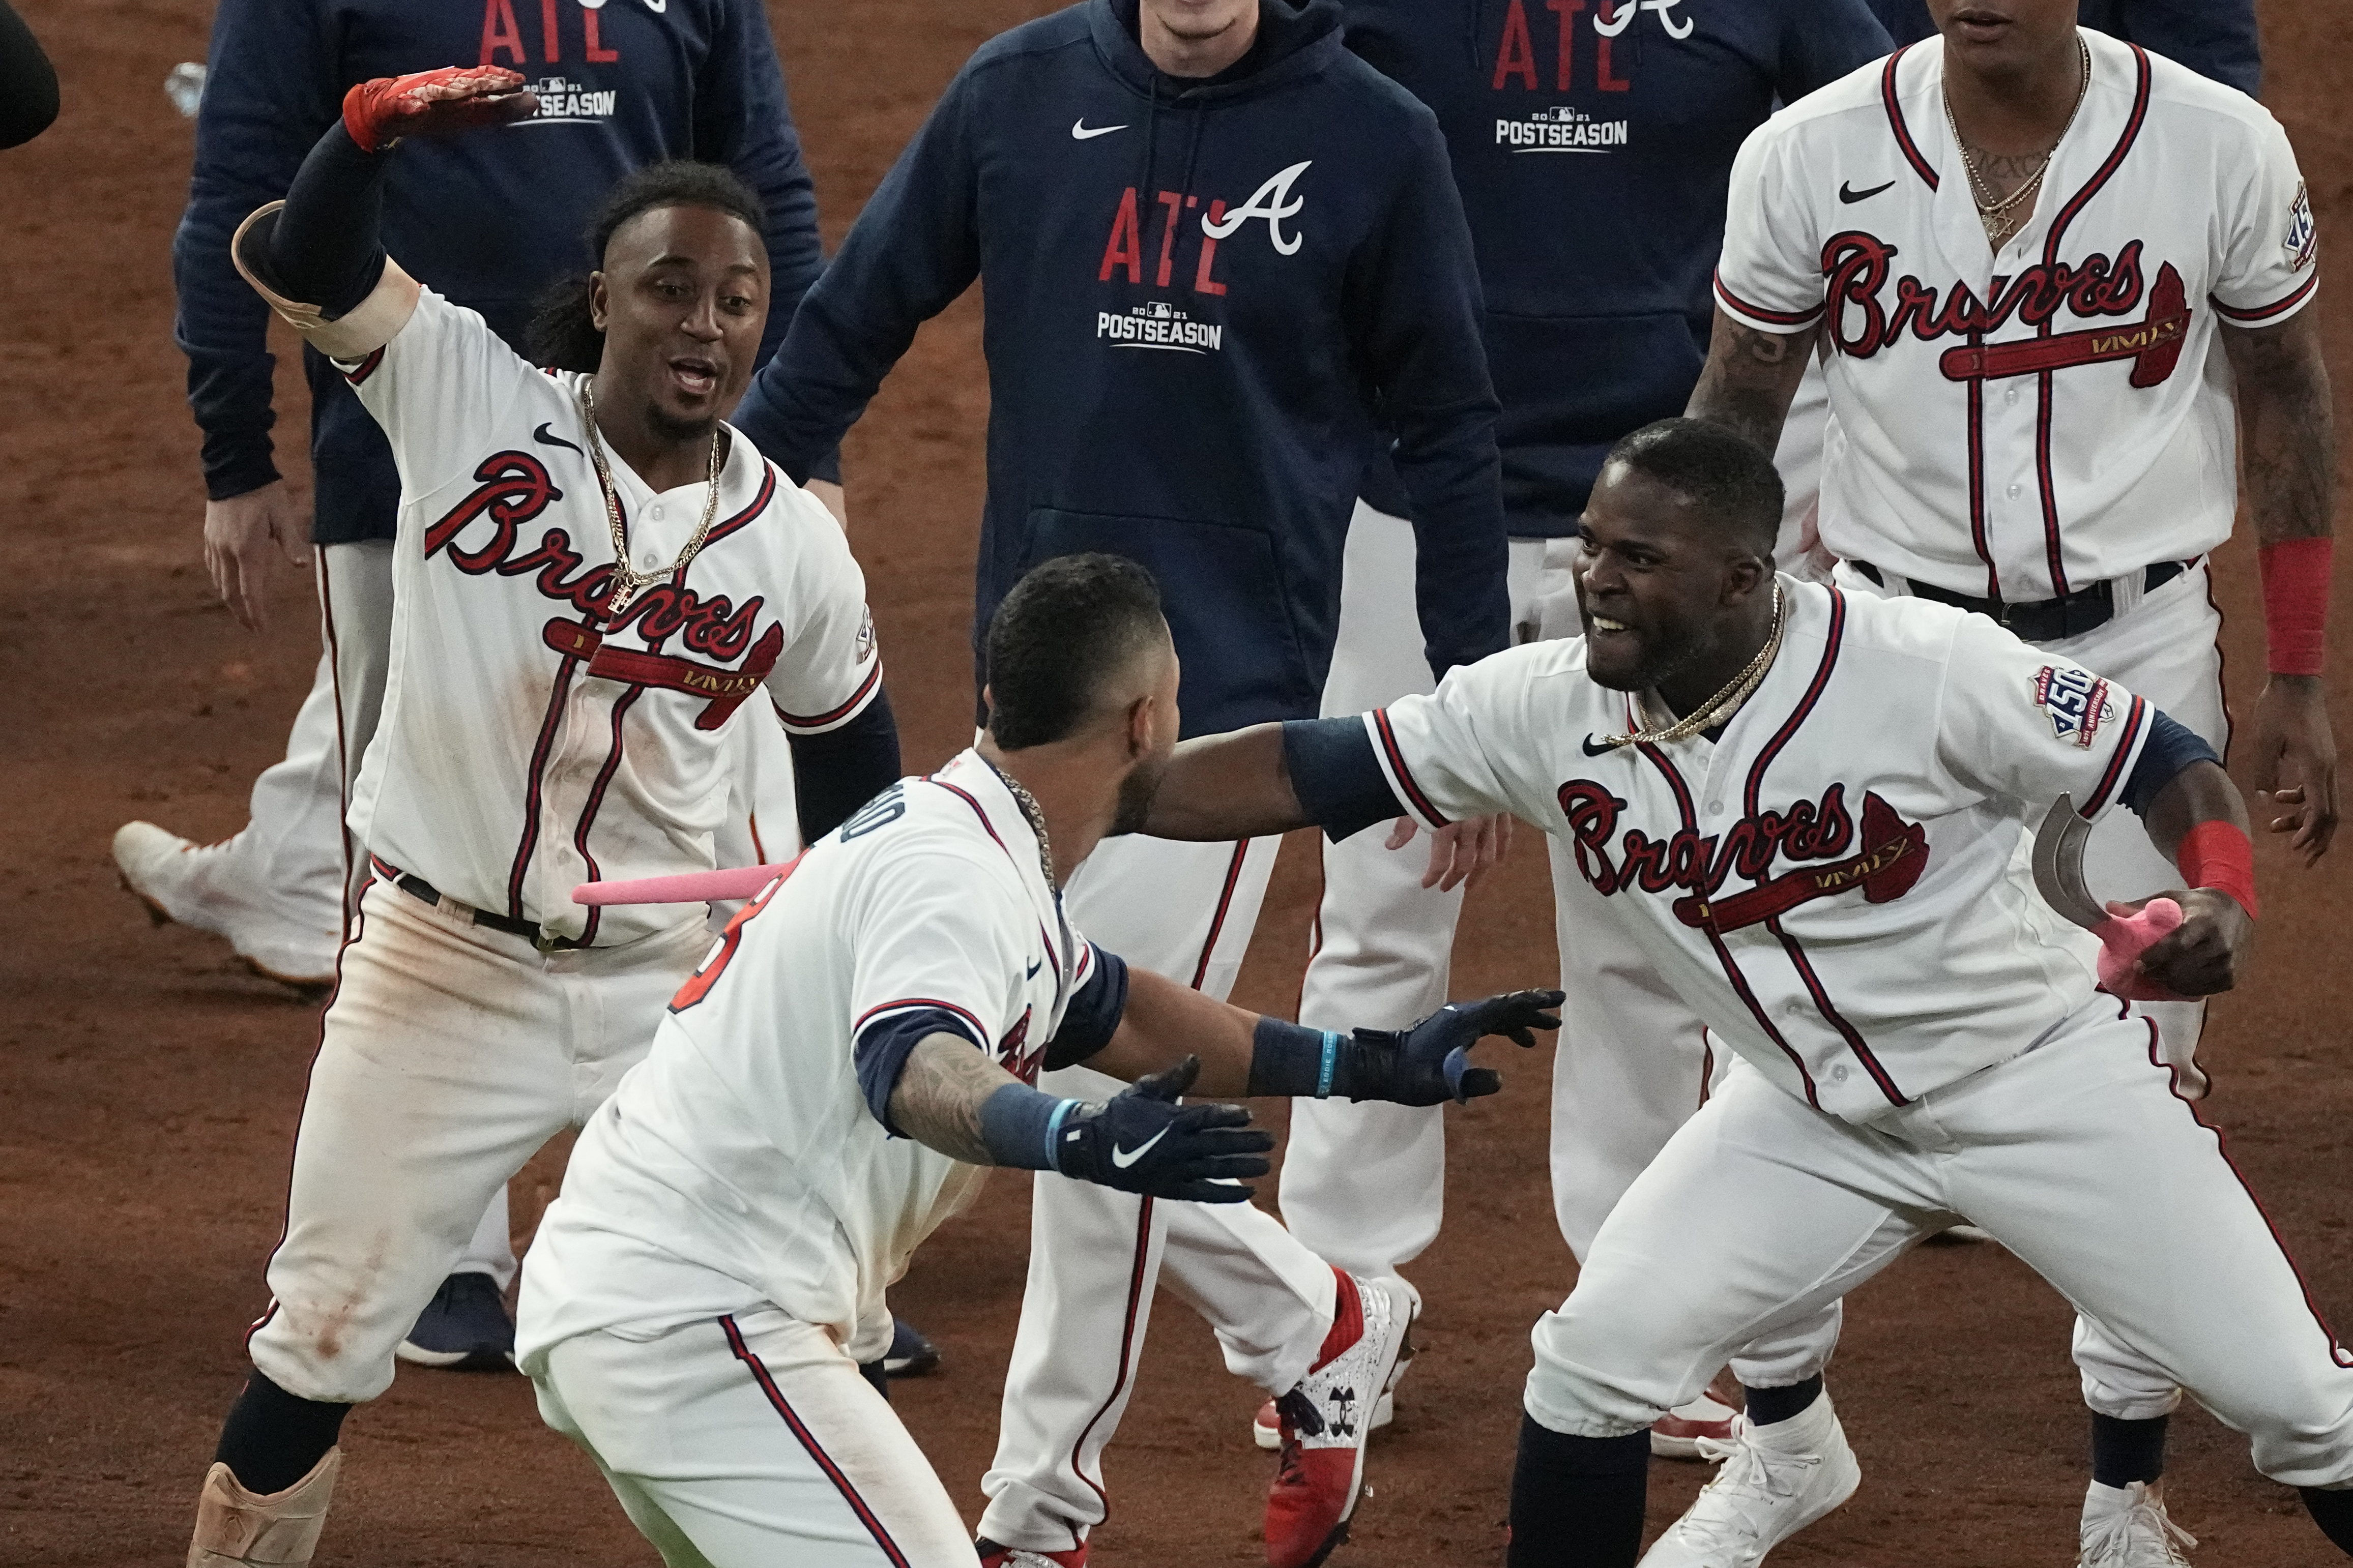 Atlanta Braves unveil uniforms that are a tribute to Hank Aaron